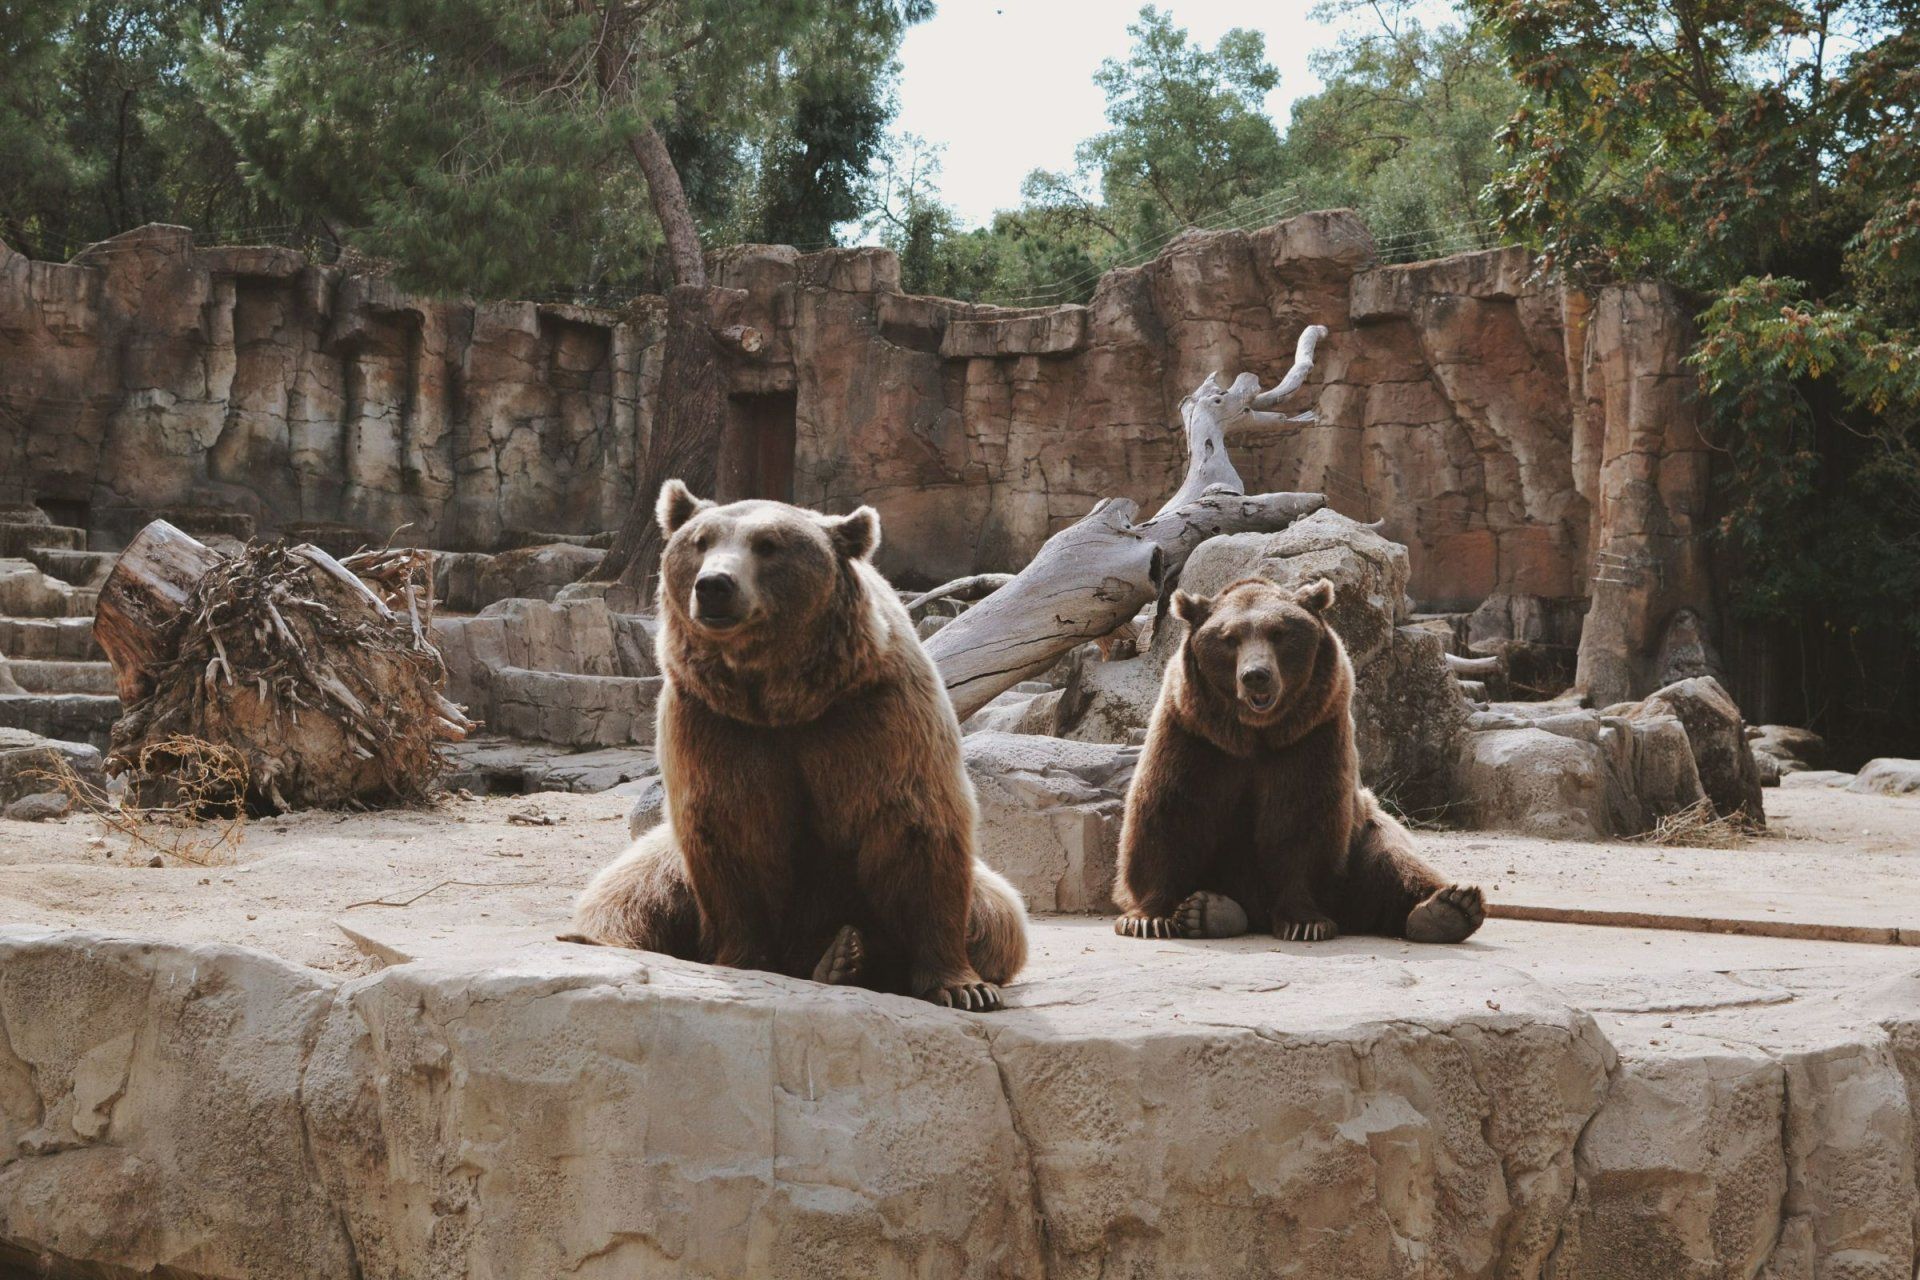 two bears are sitting on a rock in a zoo enclosure